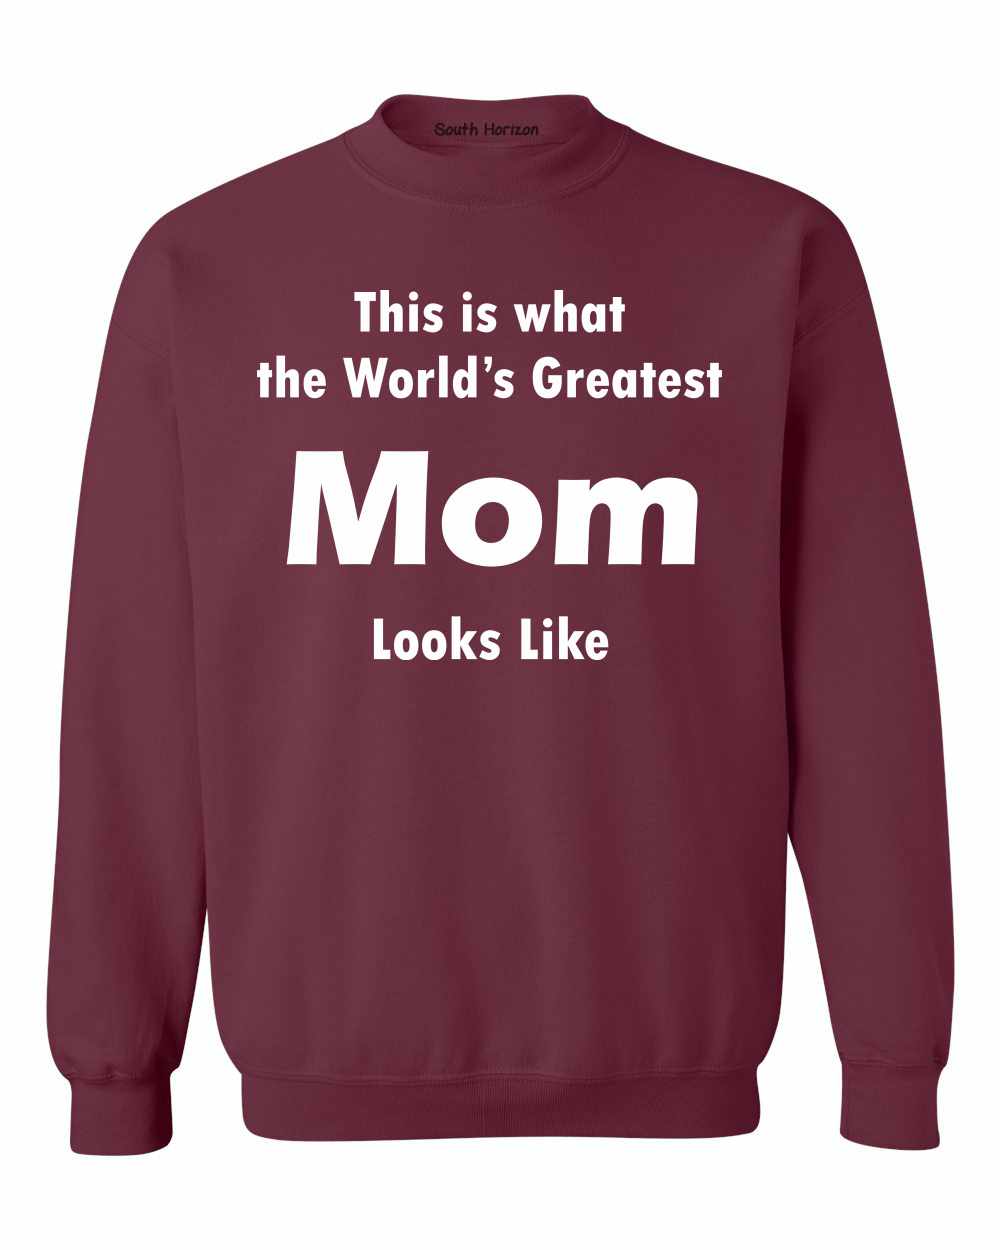 This is what the World's Greatest Mom Looks Like Sweat Shirt (#762-11)